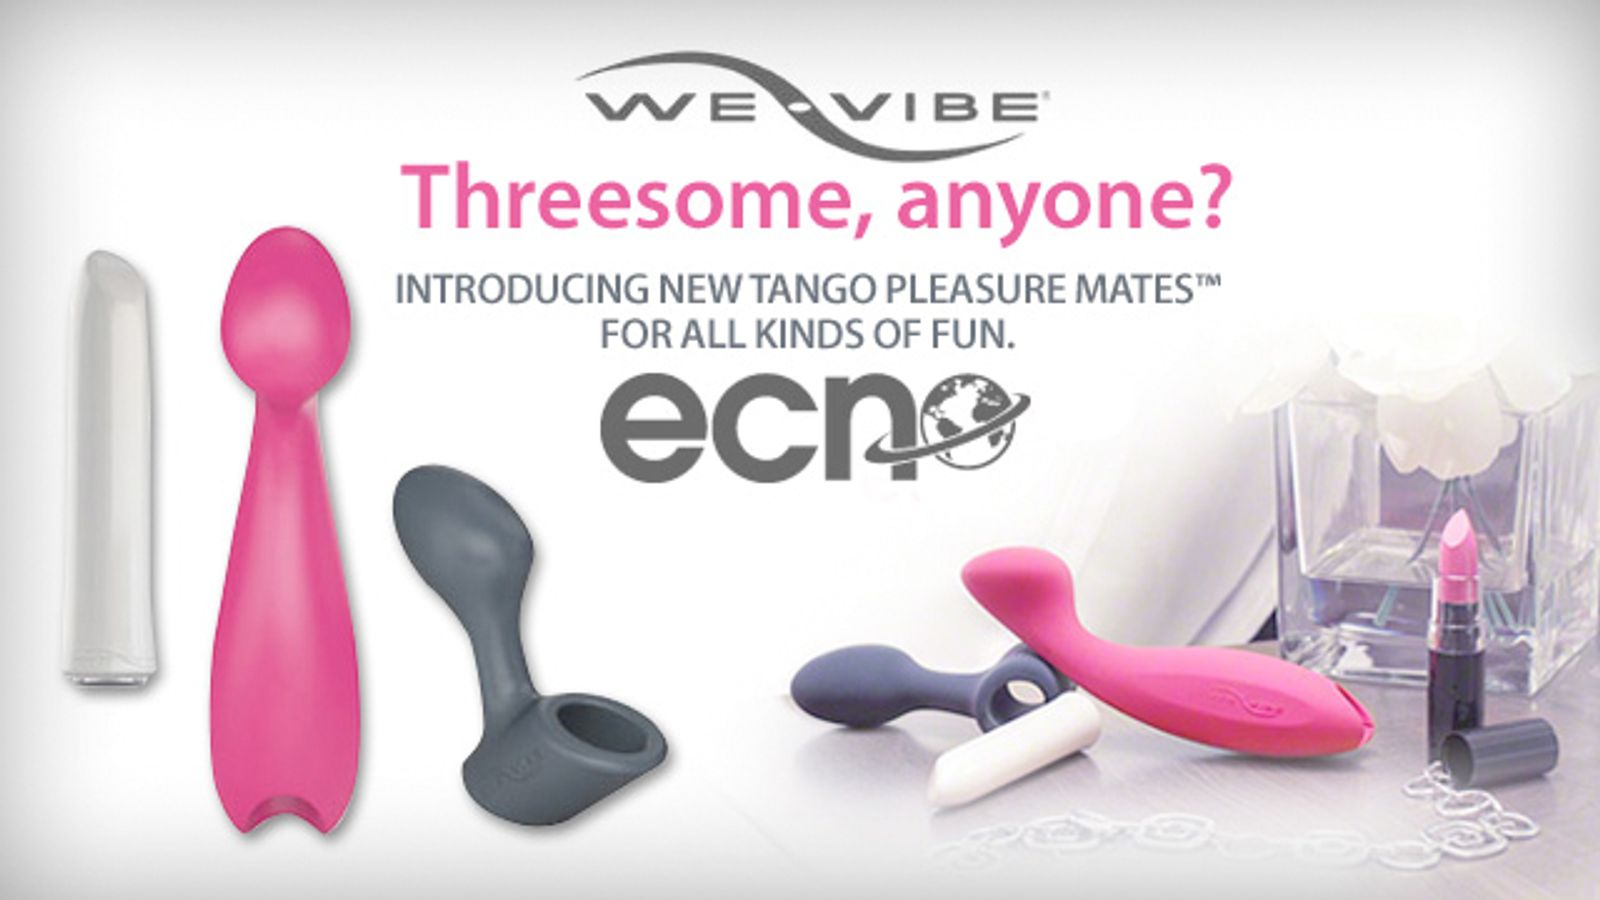 East Coast News To Carry Tango Pleasure Mate Collection By We-Vibe